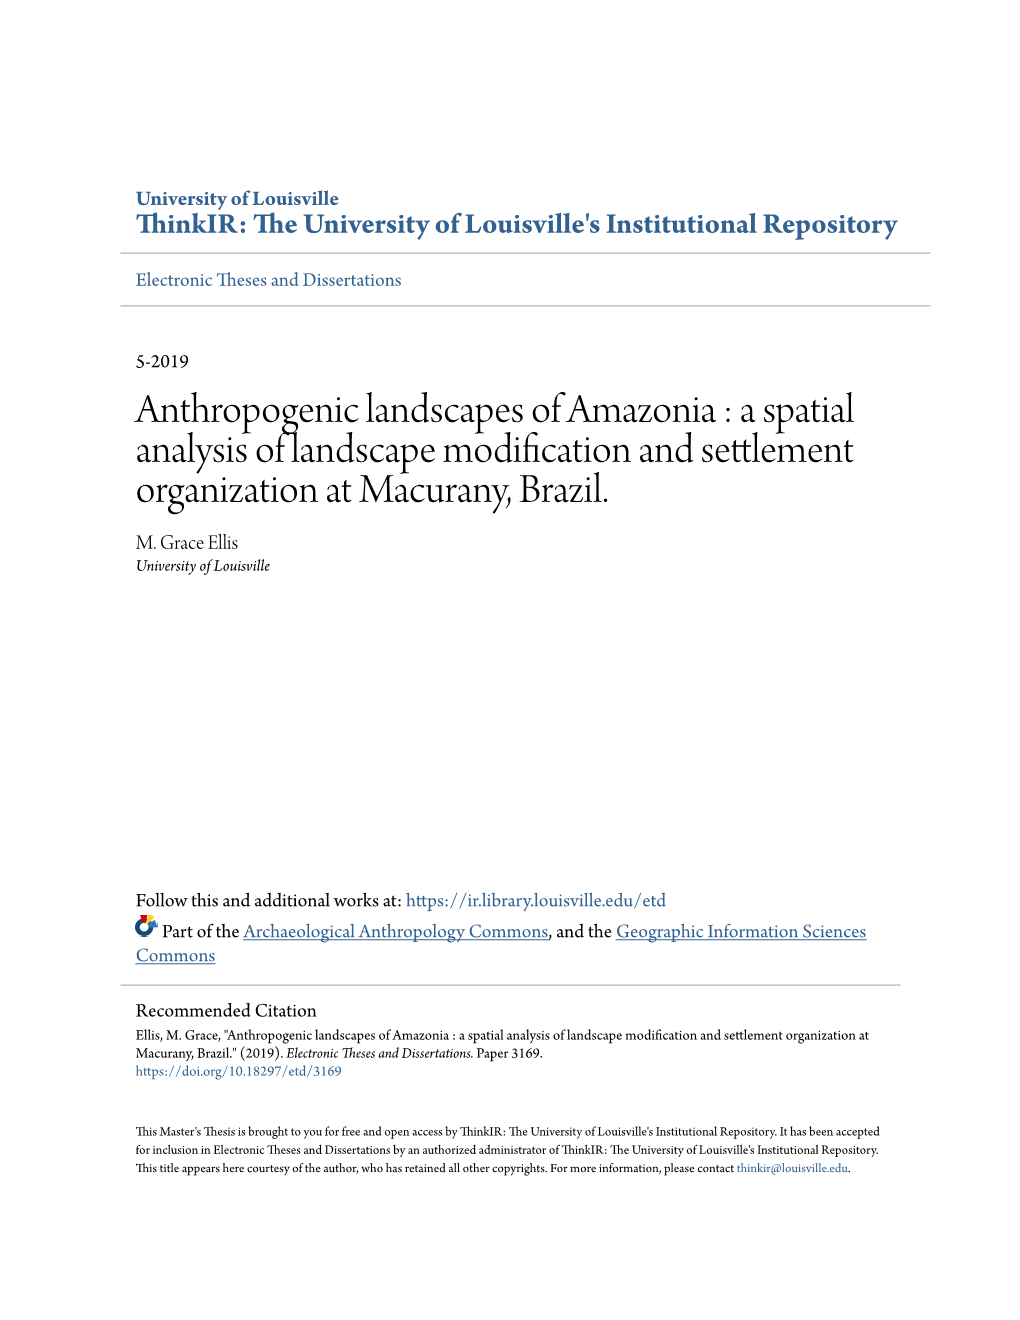 Anthropogenic Landscapes of Amazonia : a Spatial Analysis of Landscape Modification and Settlement Organization at Macurany, Brazil